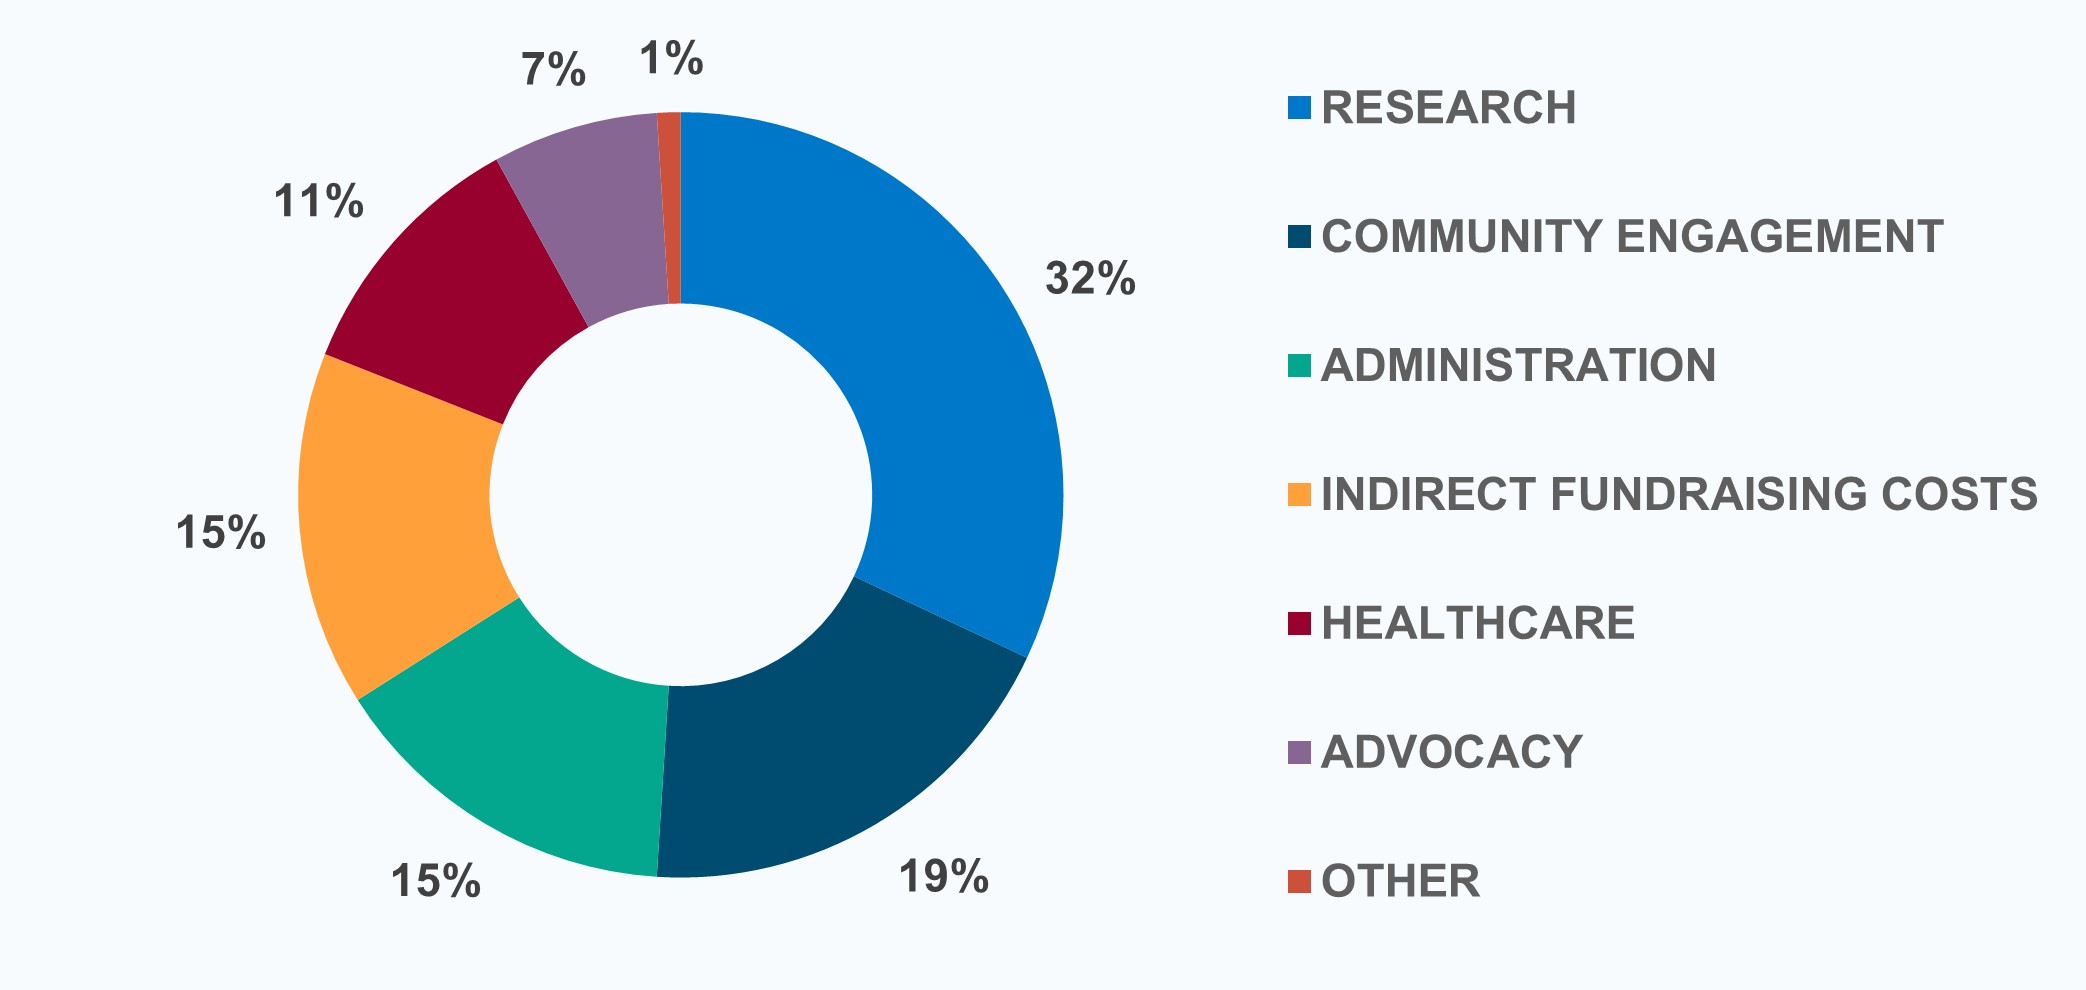 32% of funds are put towards research and the rest is allocated to community engagement, administration, indirect fundraising costs, advocacy and other.